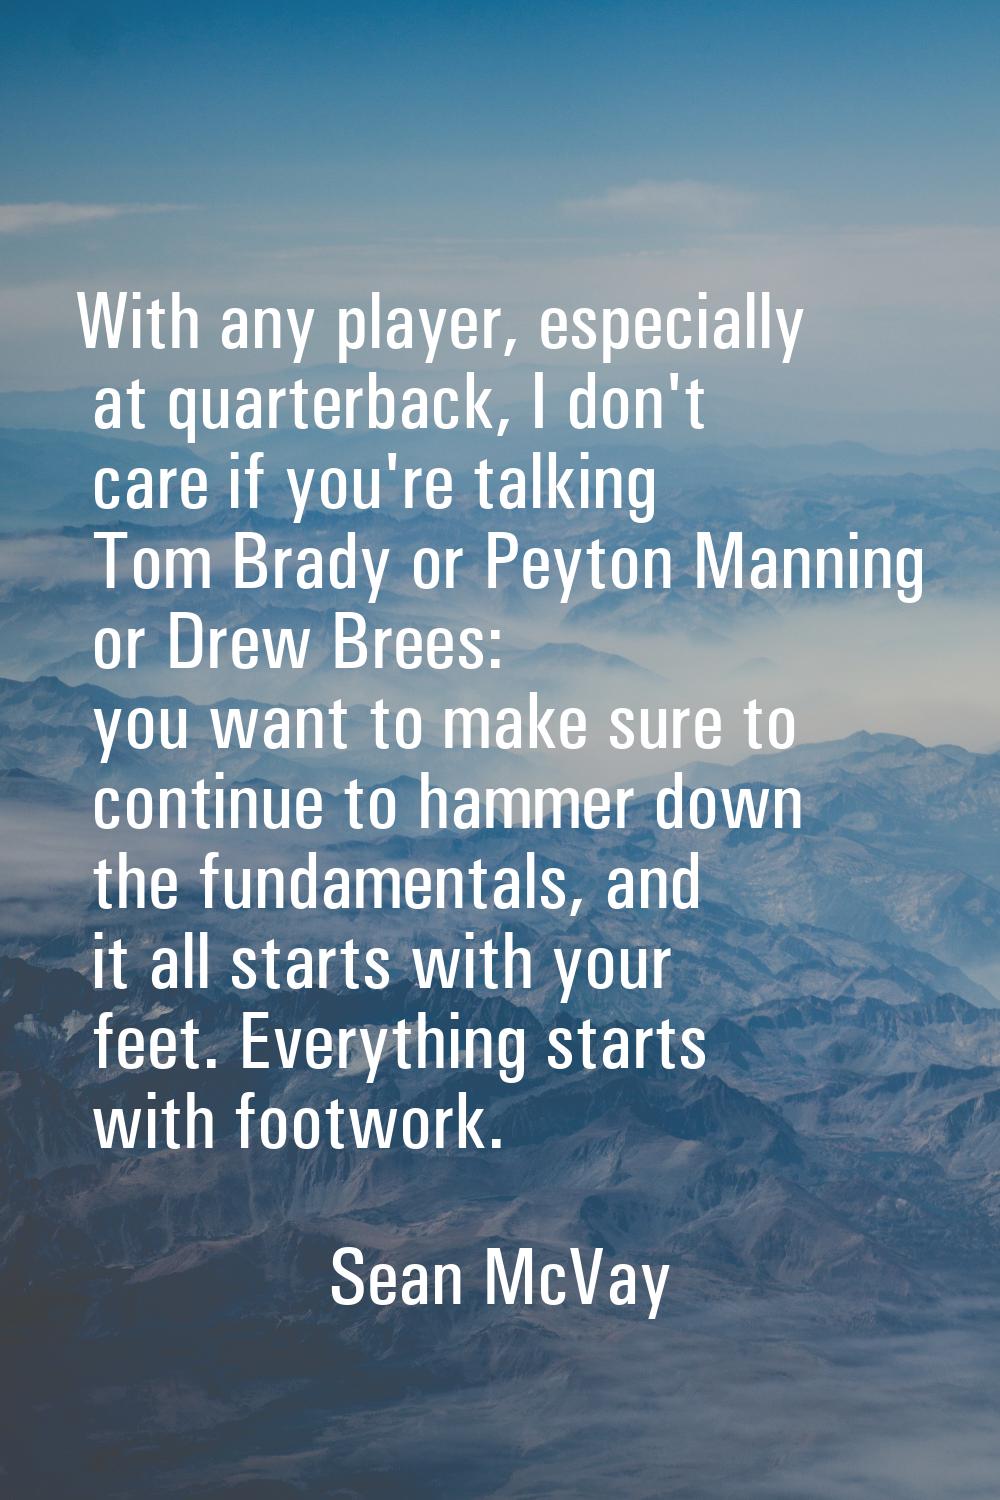 With any player, especially at quarterback, I don't care if you're talking Tom Brady or Peyton Mann